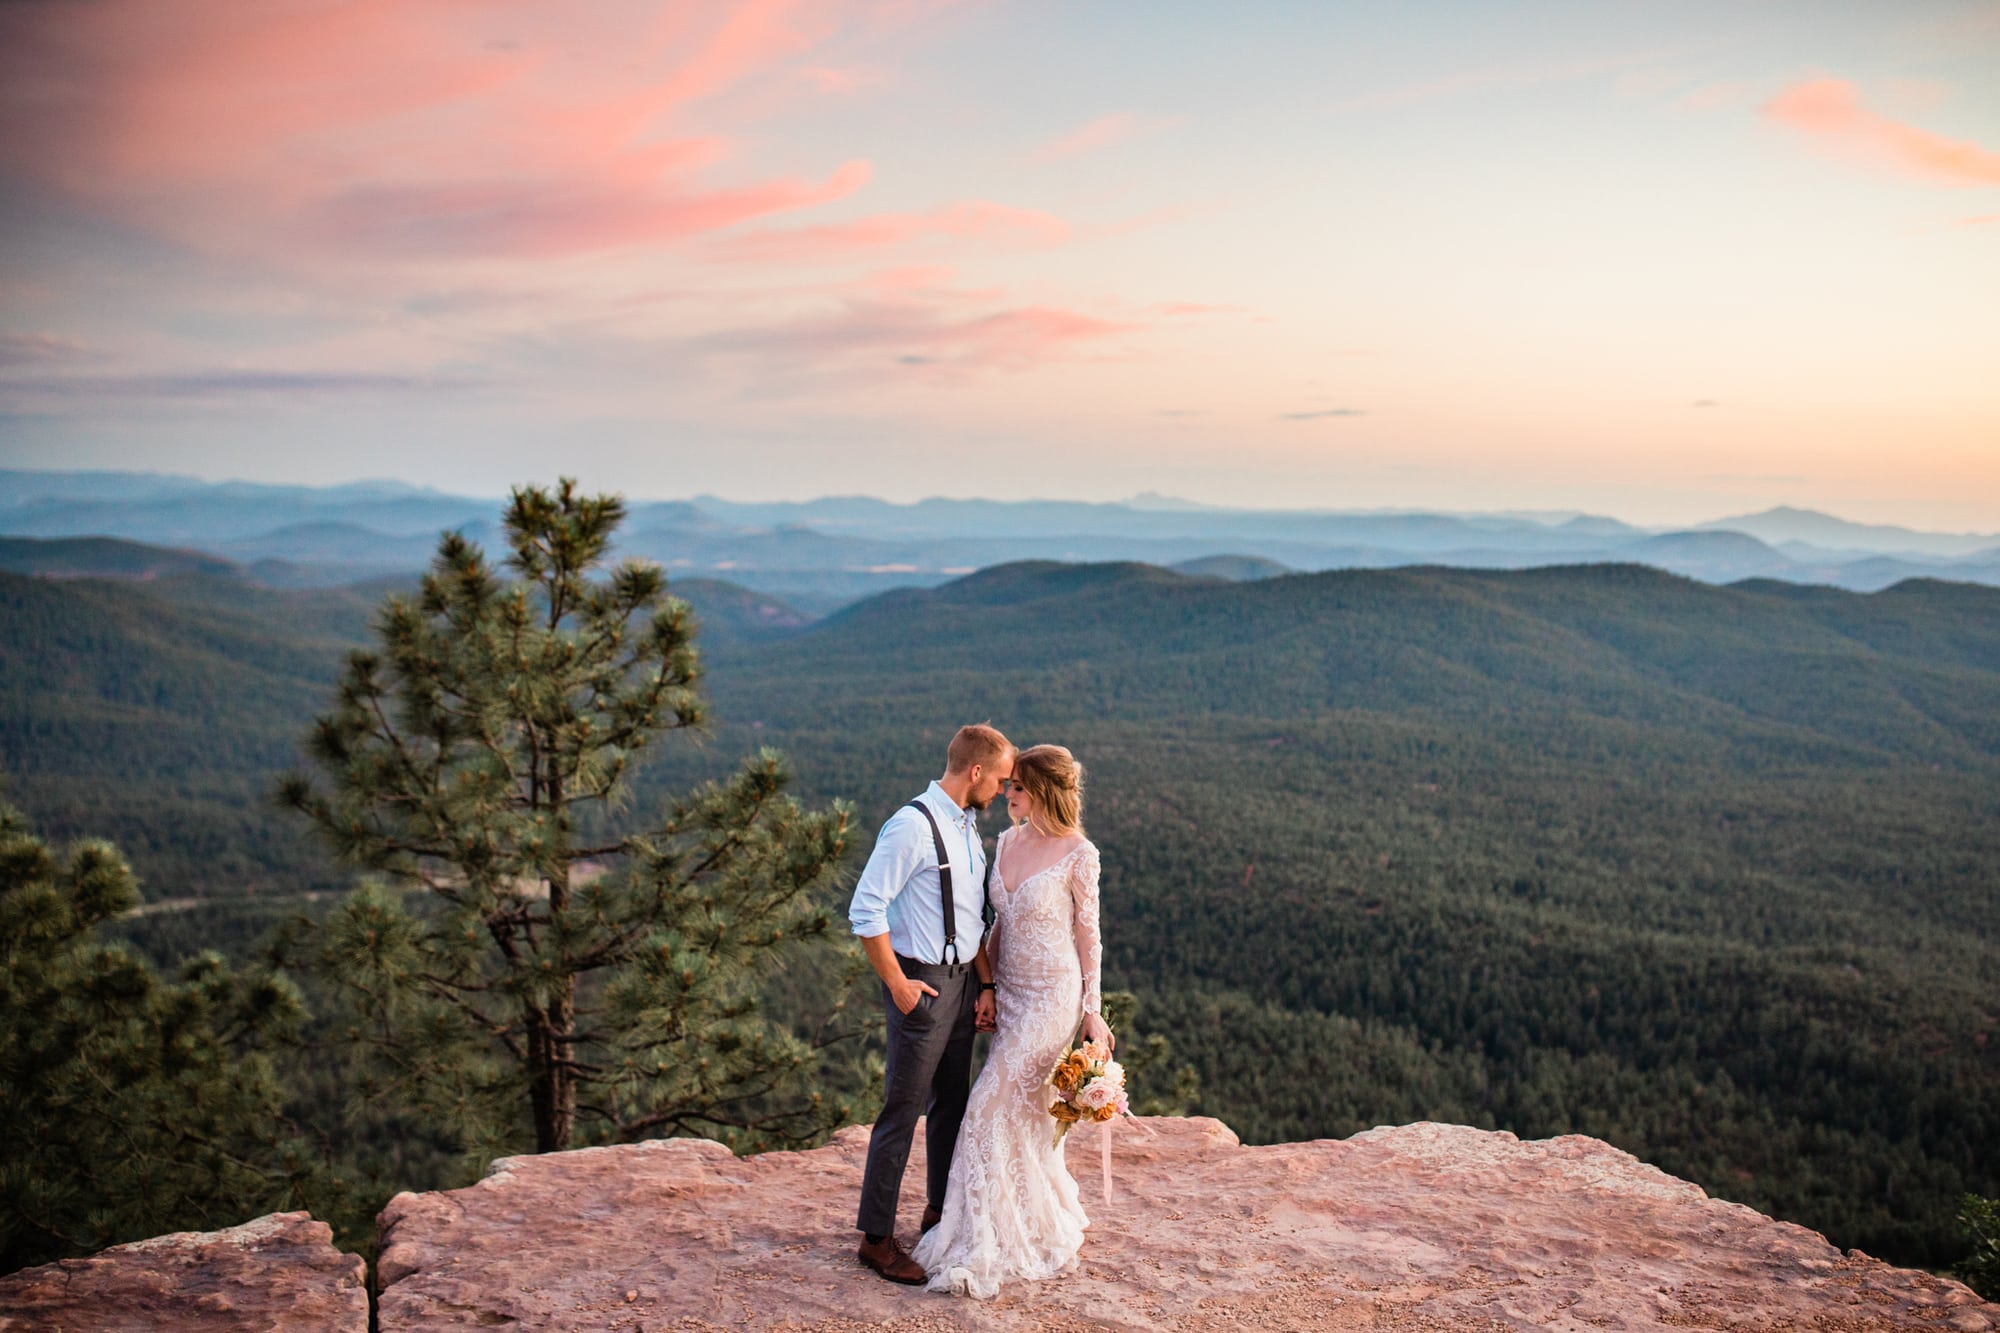 Having just eloped in Arizona, a bride and groom stand near a cliff's edge. The sunset sky turns pink behind them.